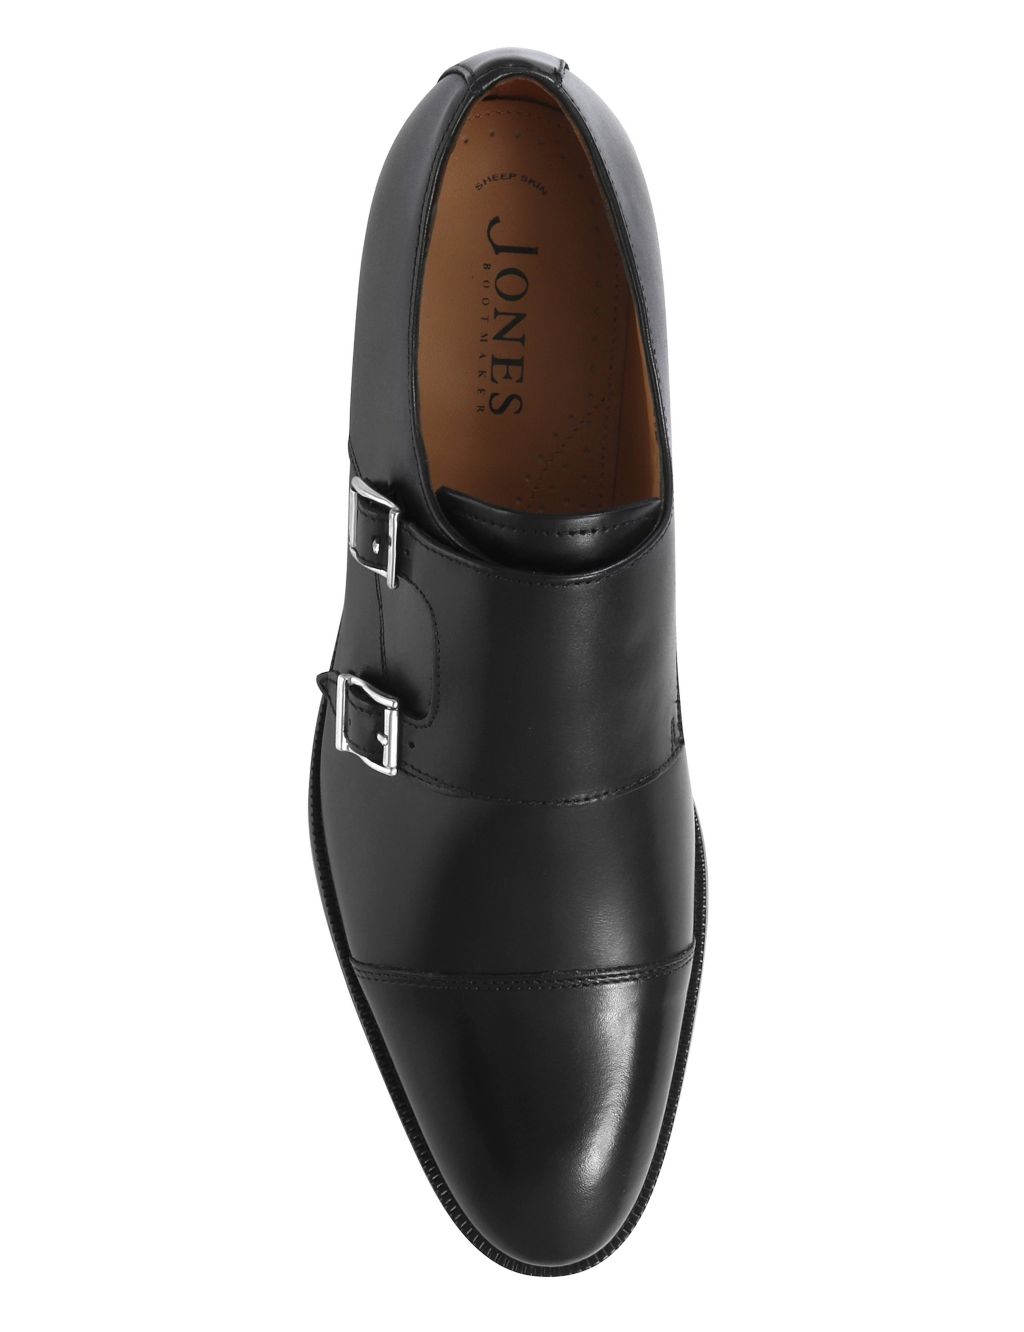 Leather Double Monk Strap Shoes image 3